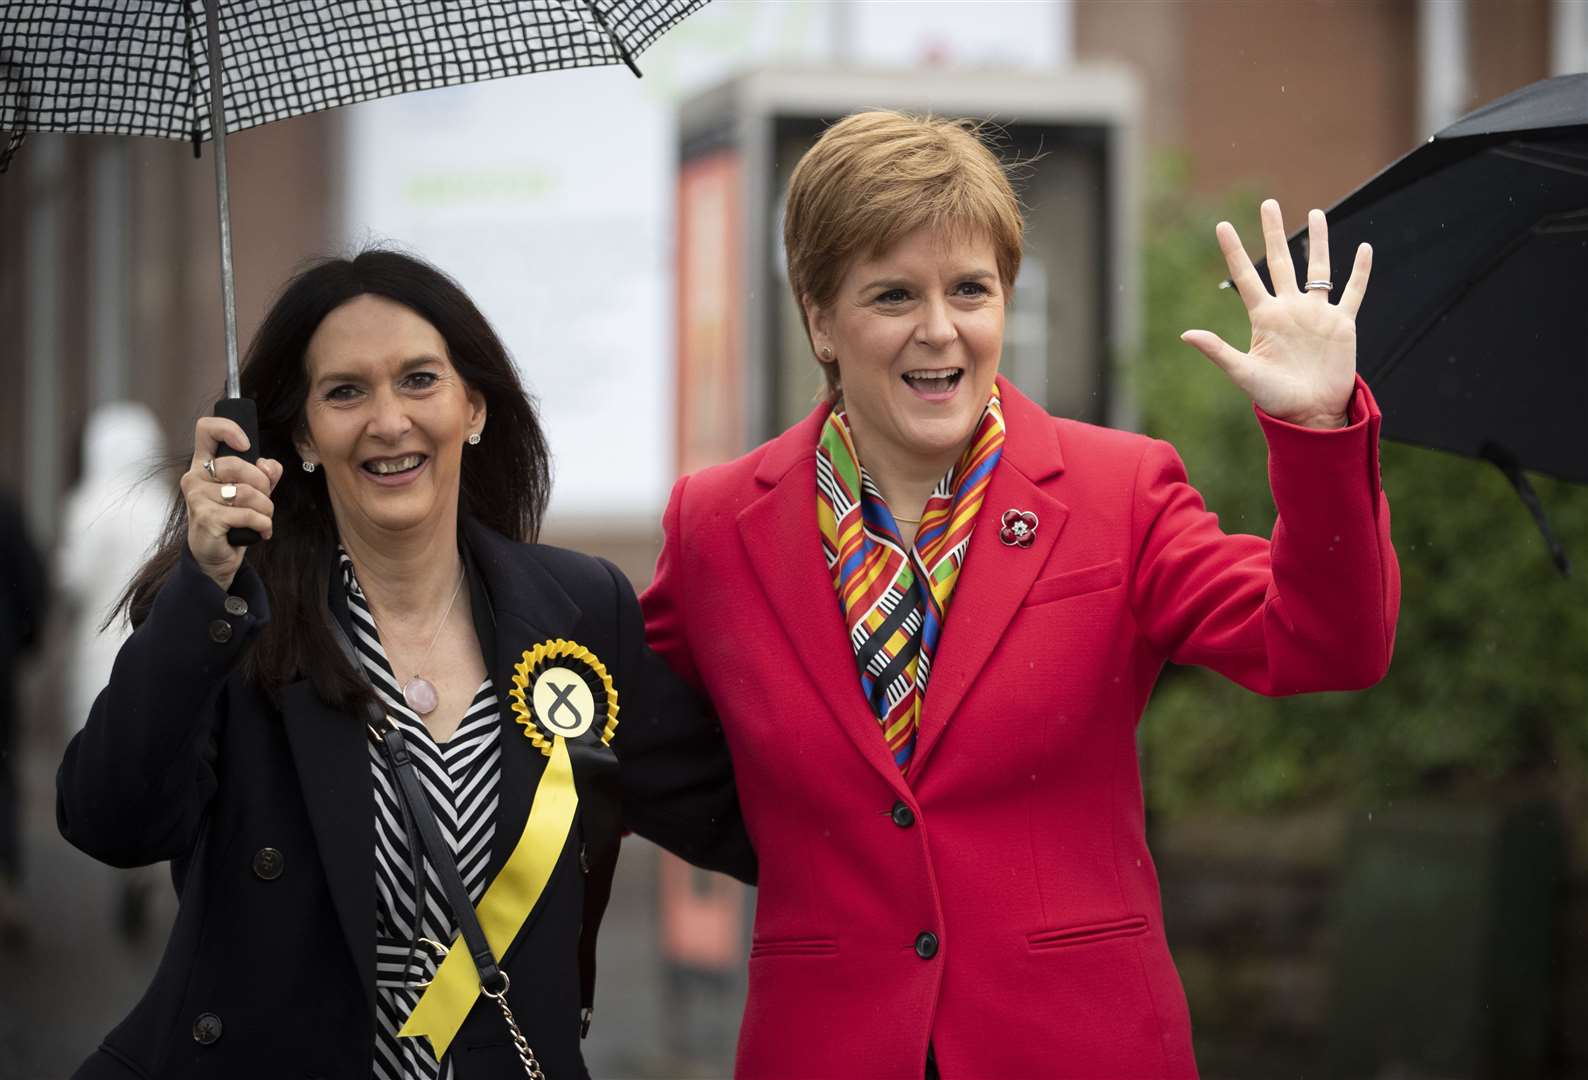 Margaret Ferrier, left, with Nicola Sturgeon, was elected as an SNP MP but had the whip suspended (Jane Barlow/PA)